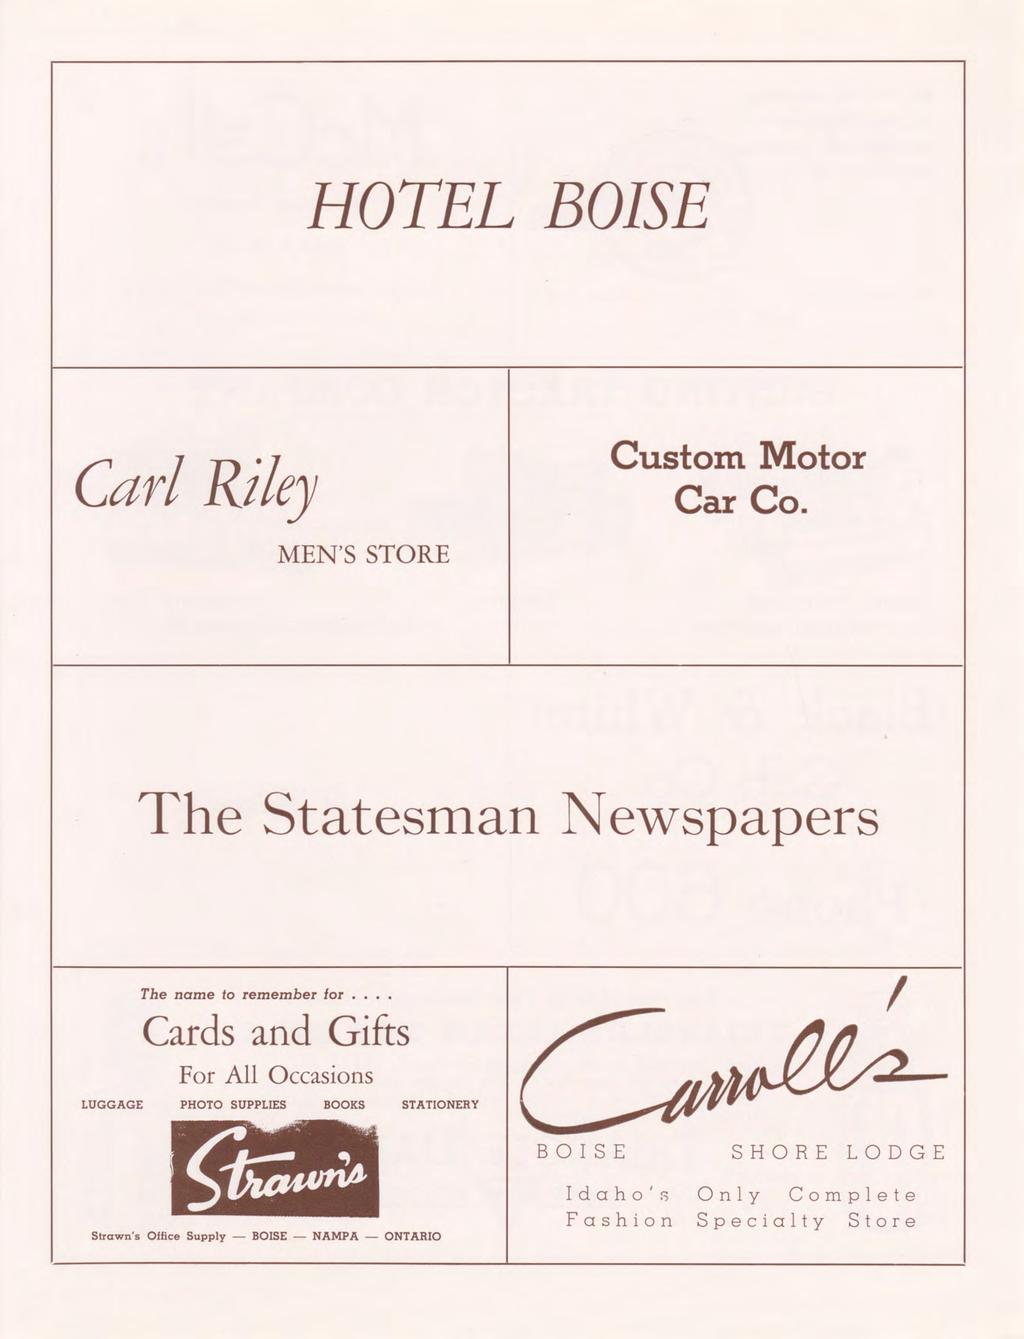 HOTEL BOISE Carl Riley MEN'S STORE Custom Motor Car Co. The Statesman Newspapers The name to remember for.